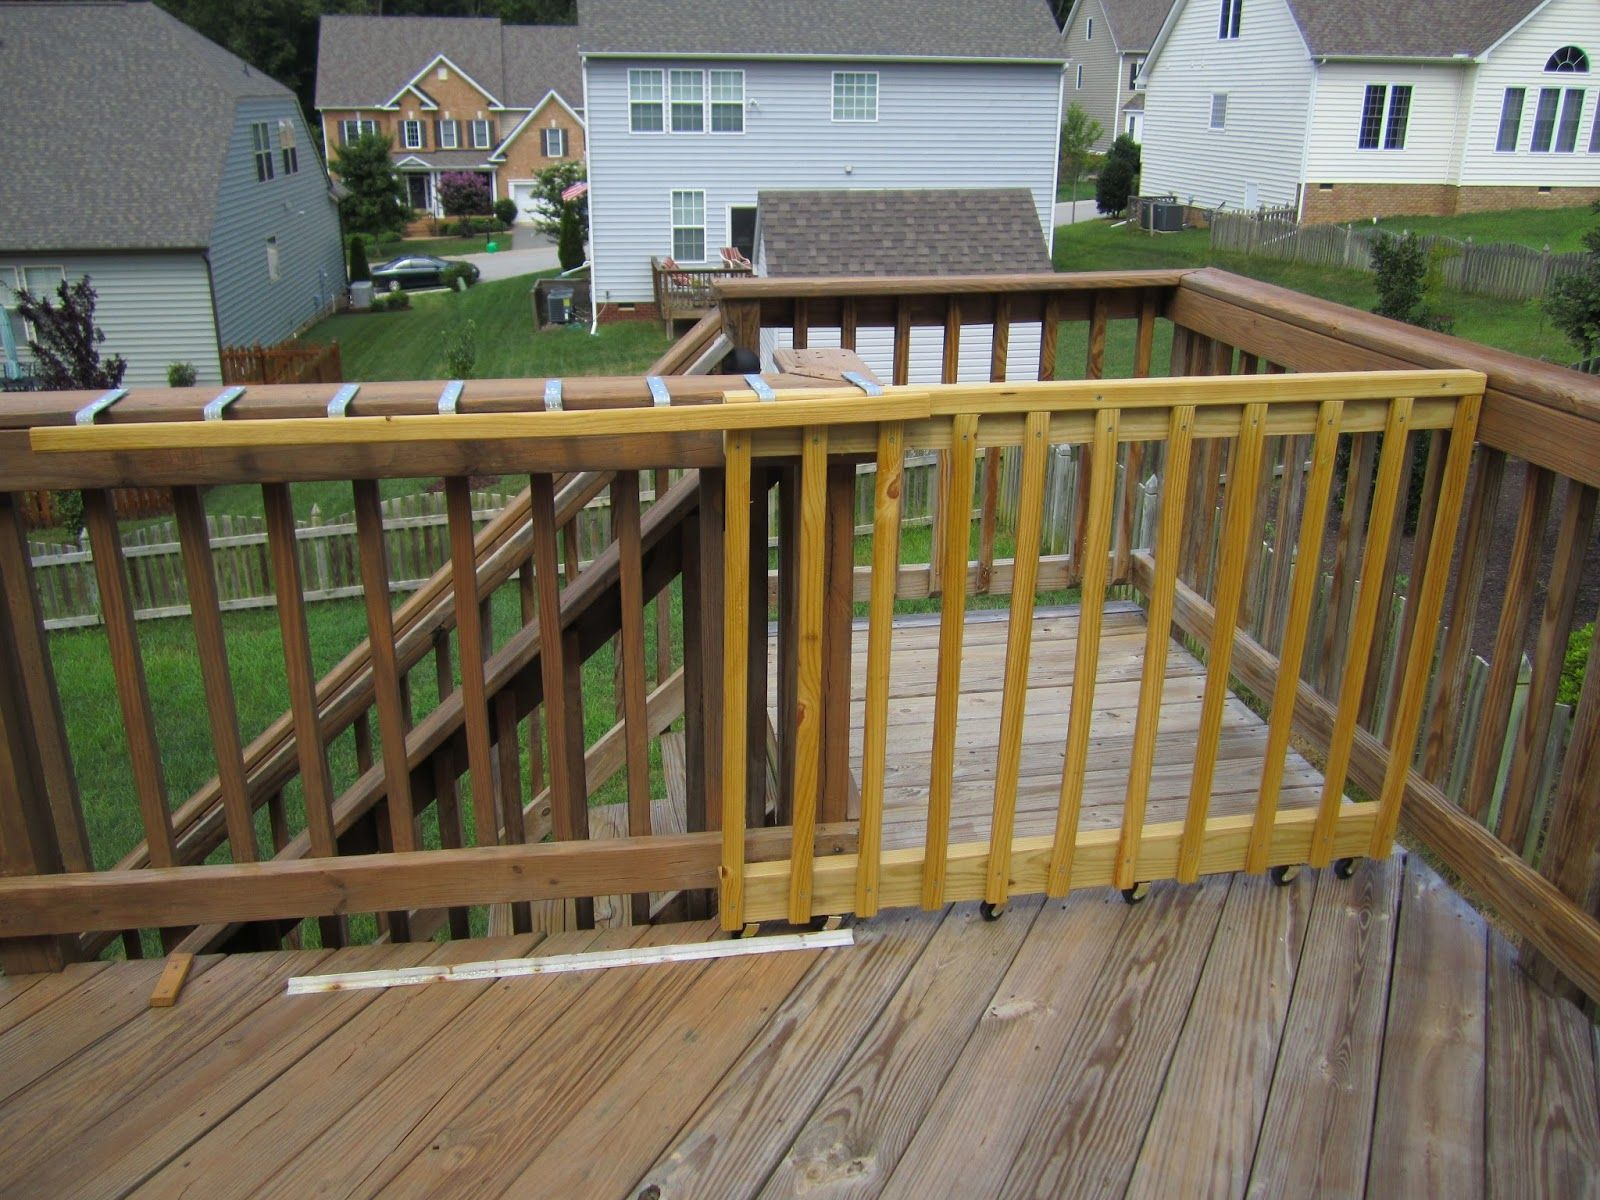 Sliding Deck Gate Above Is The Gate When It Is Open Rv Deck in dimensions 1600 X 1200